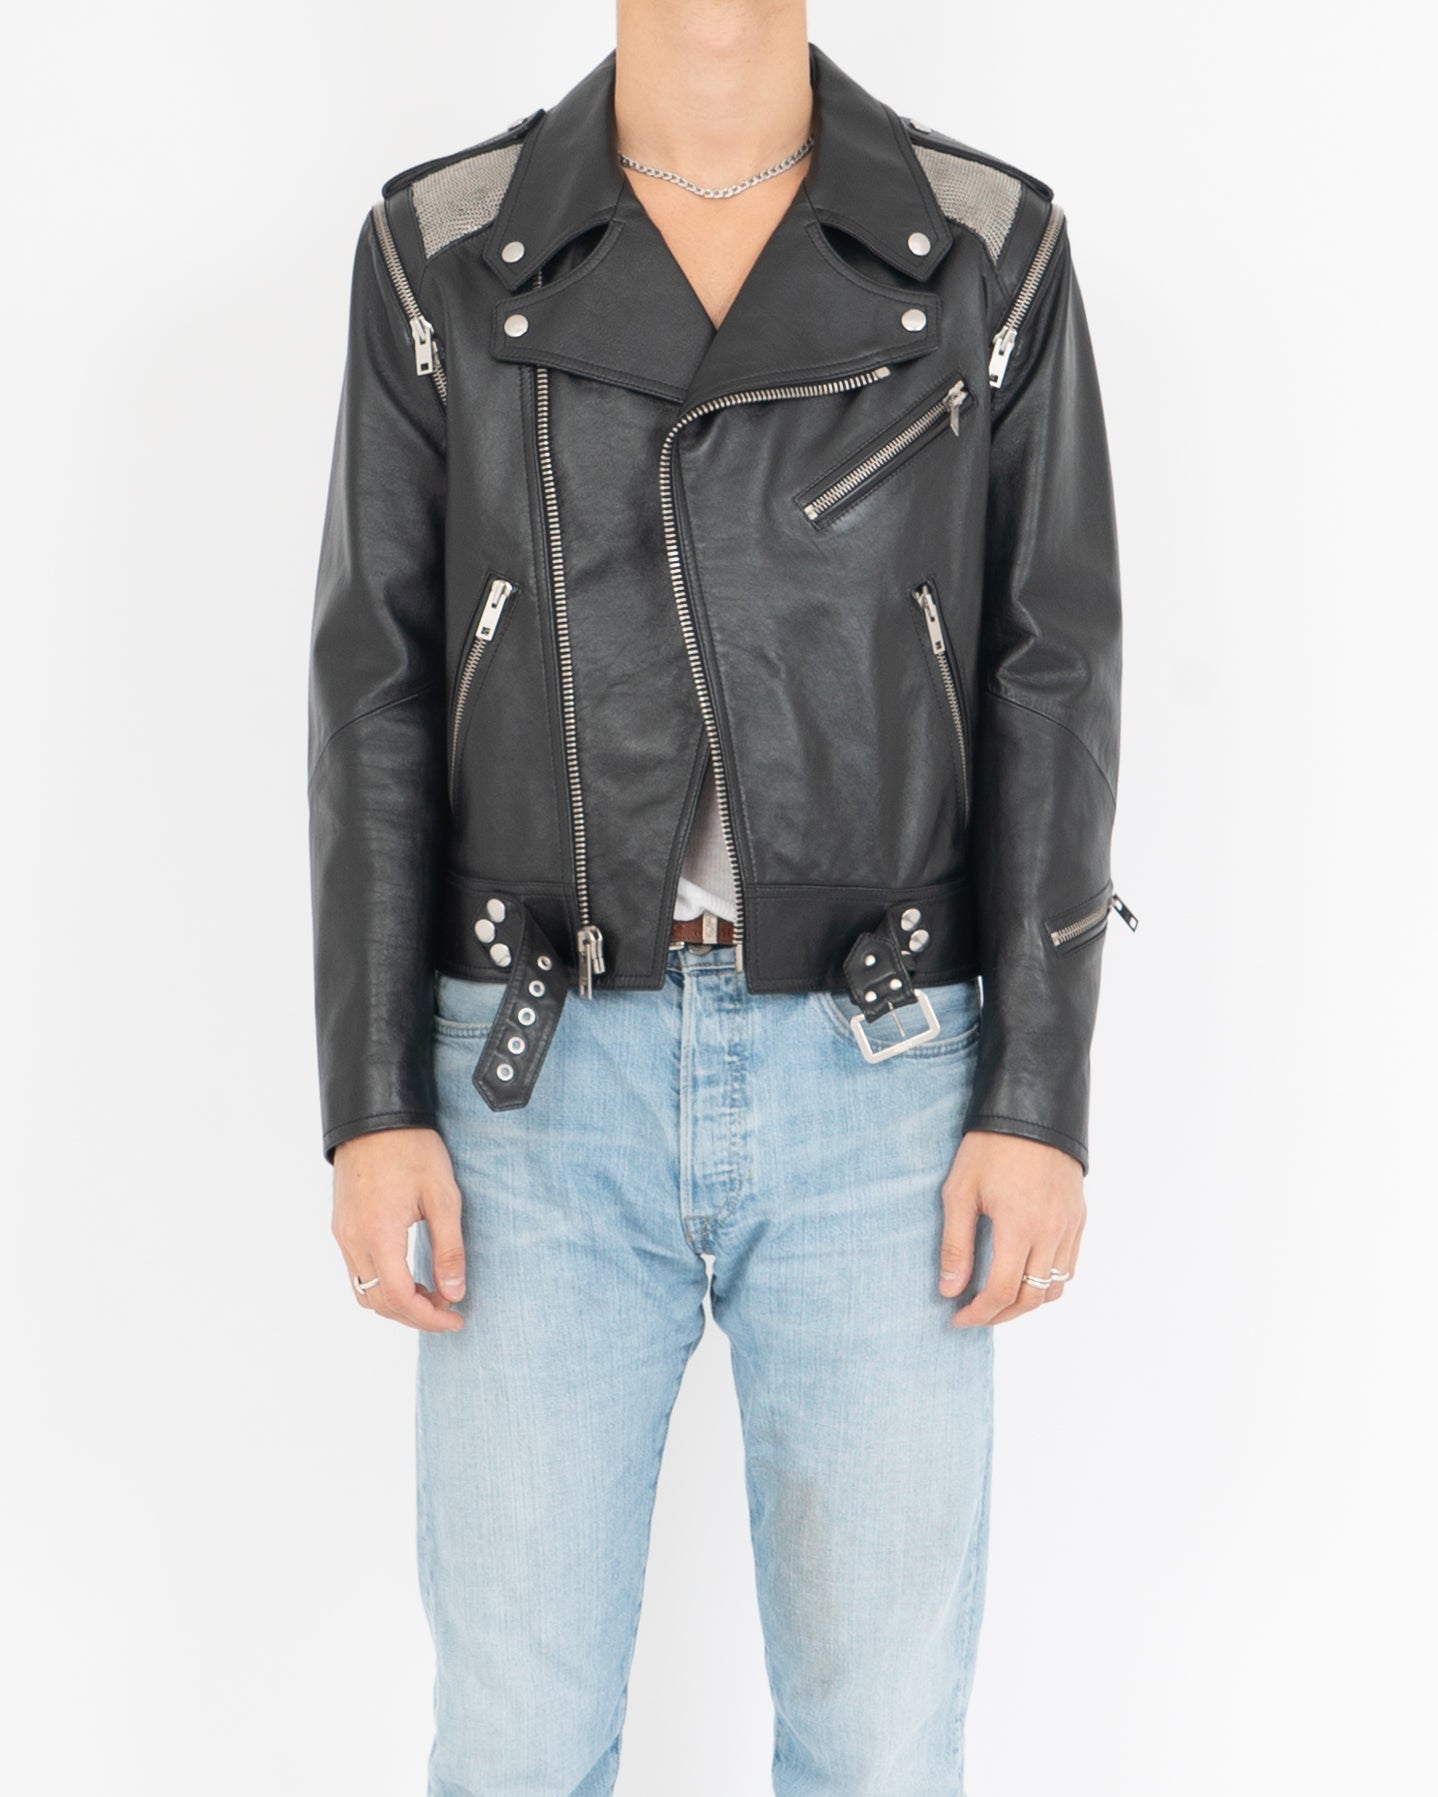 Leather Biker Jacket with Metall Insert